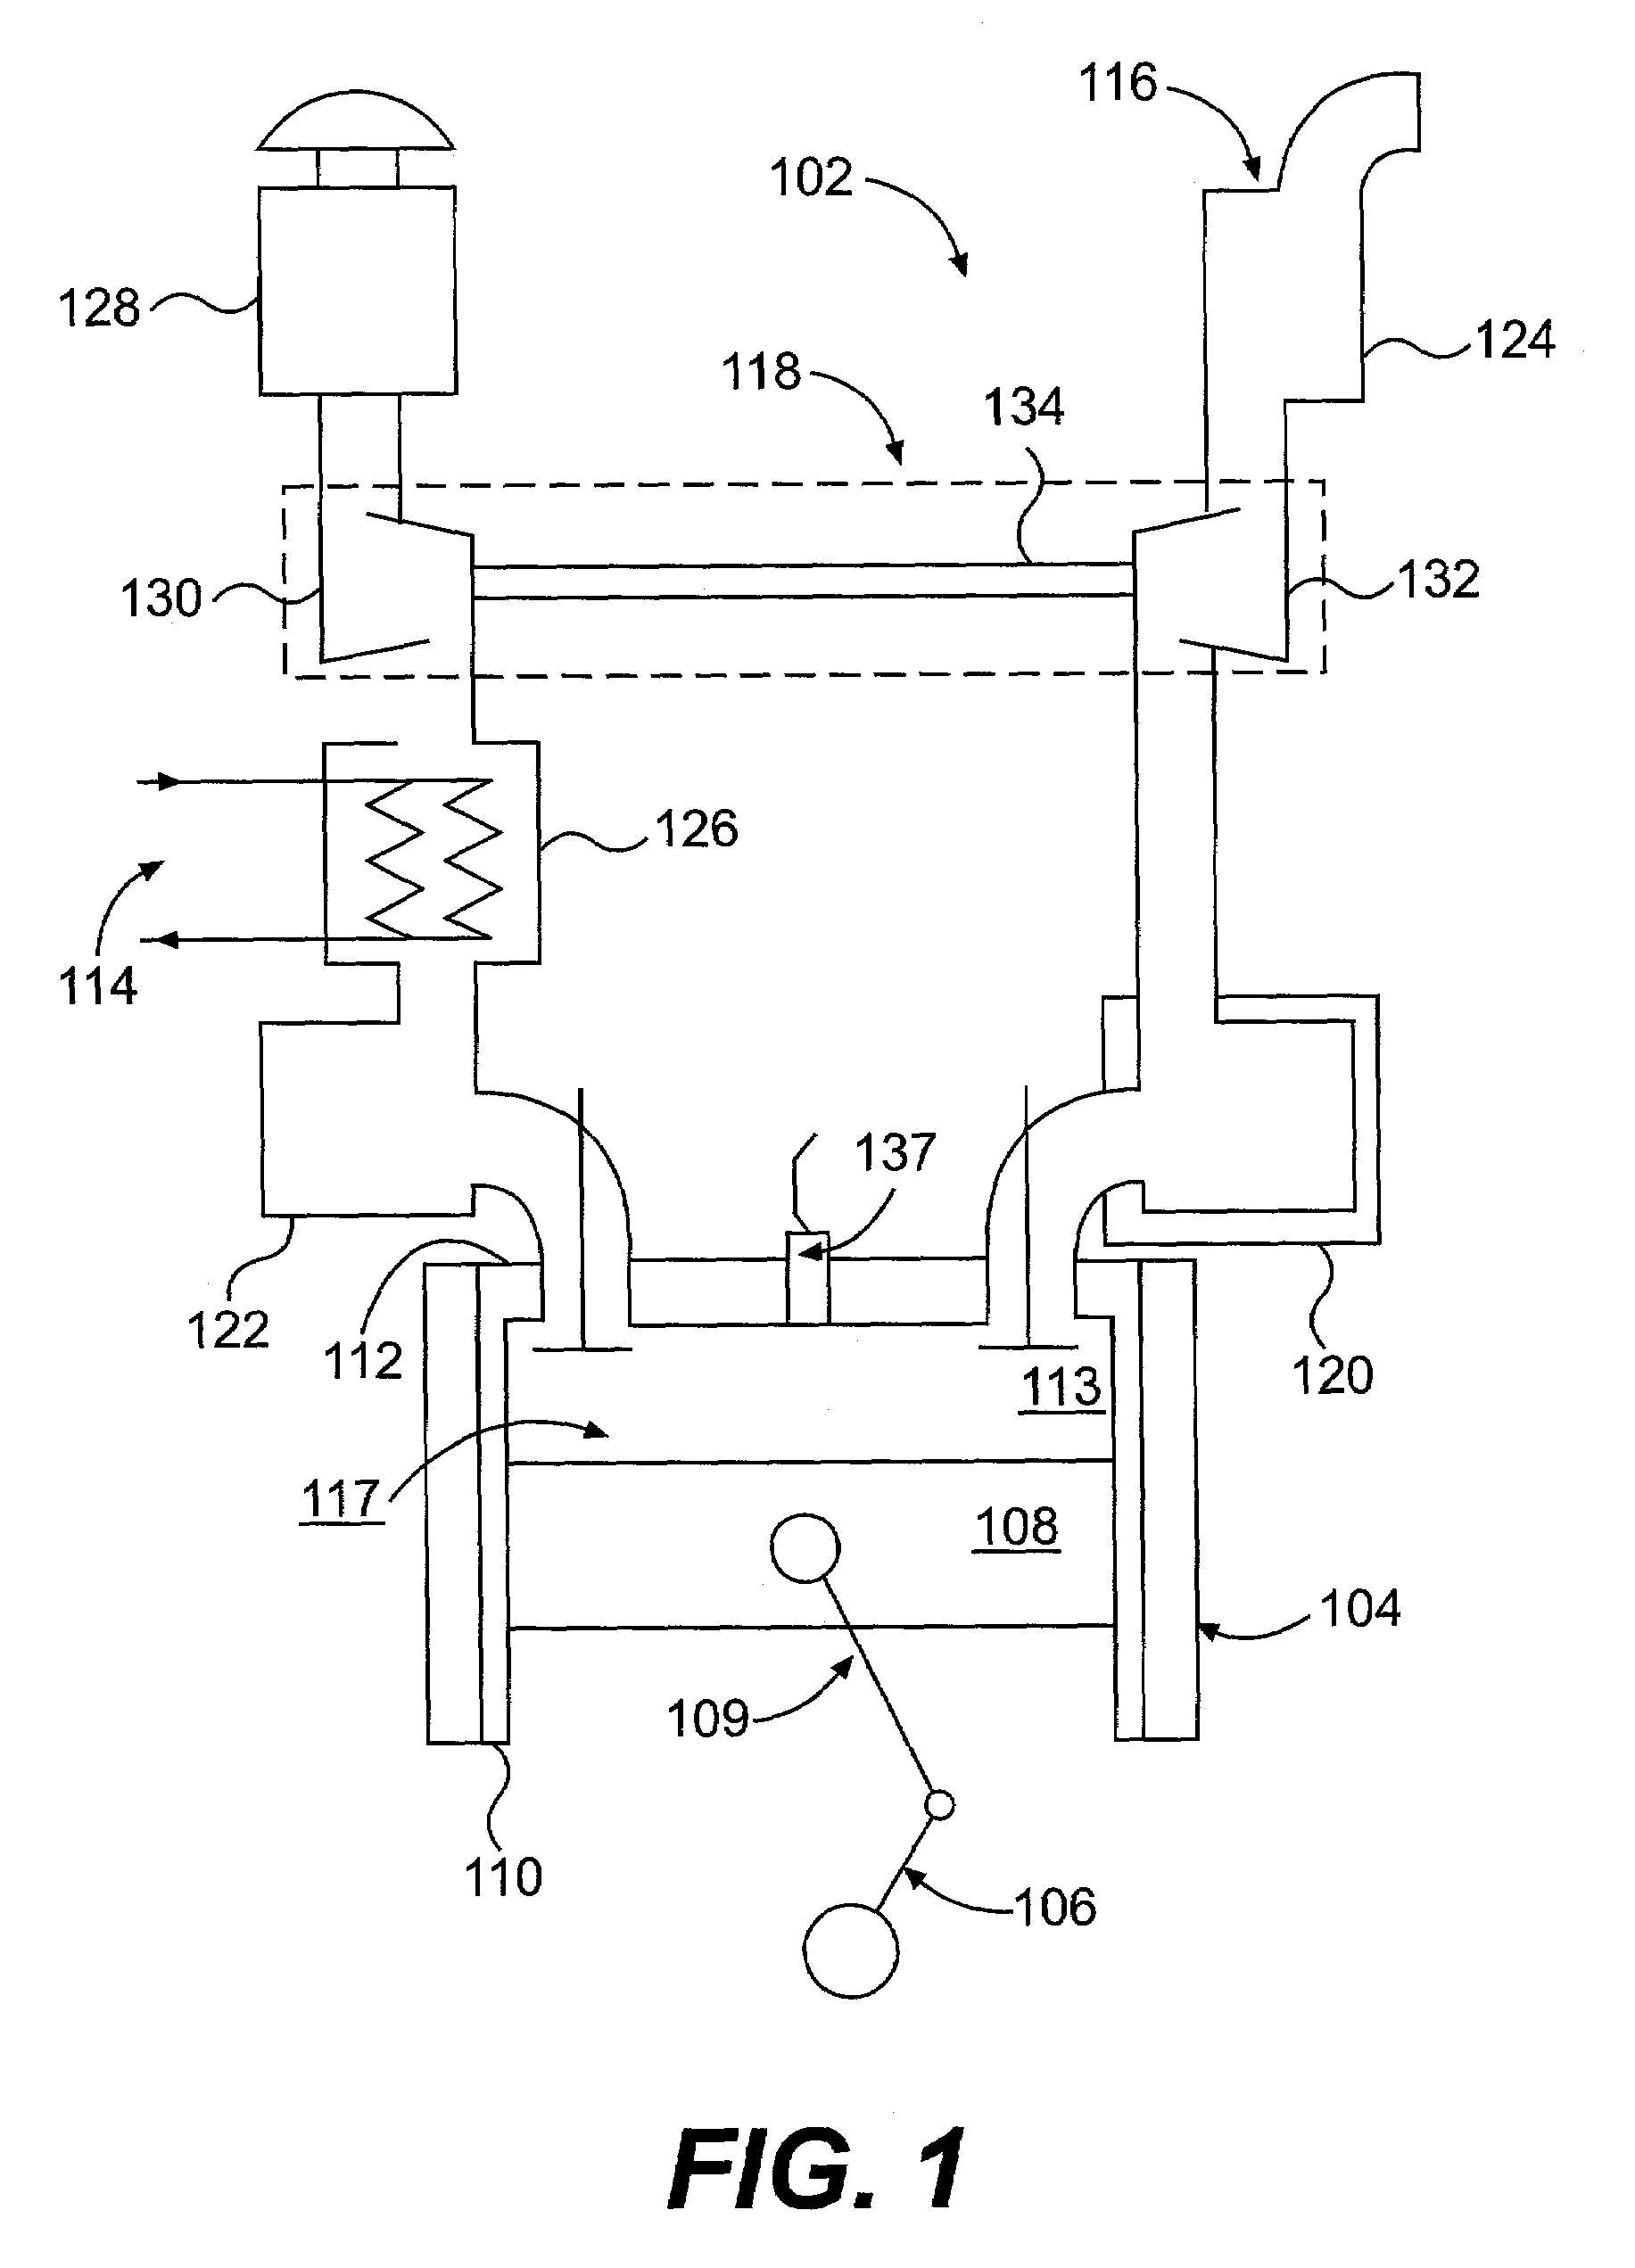 Engine control system using a cascaded neural network